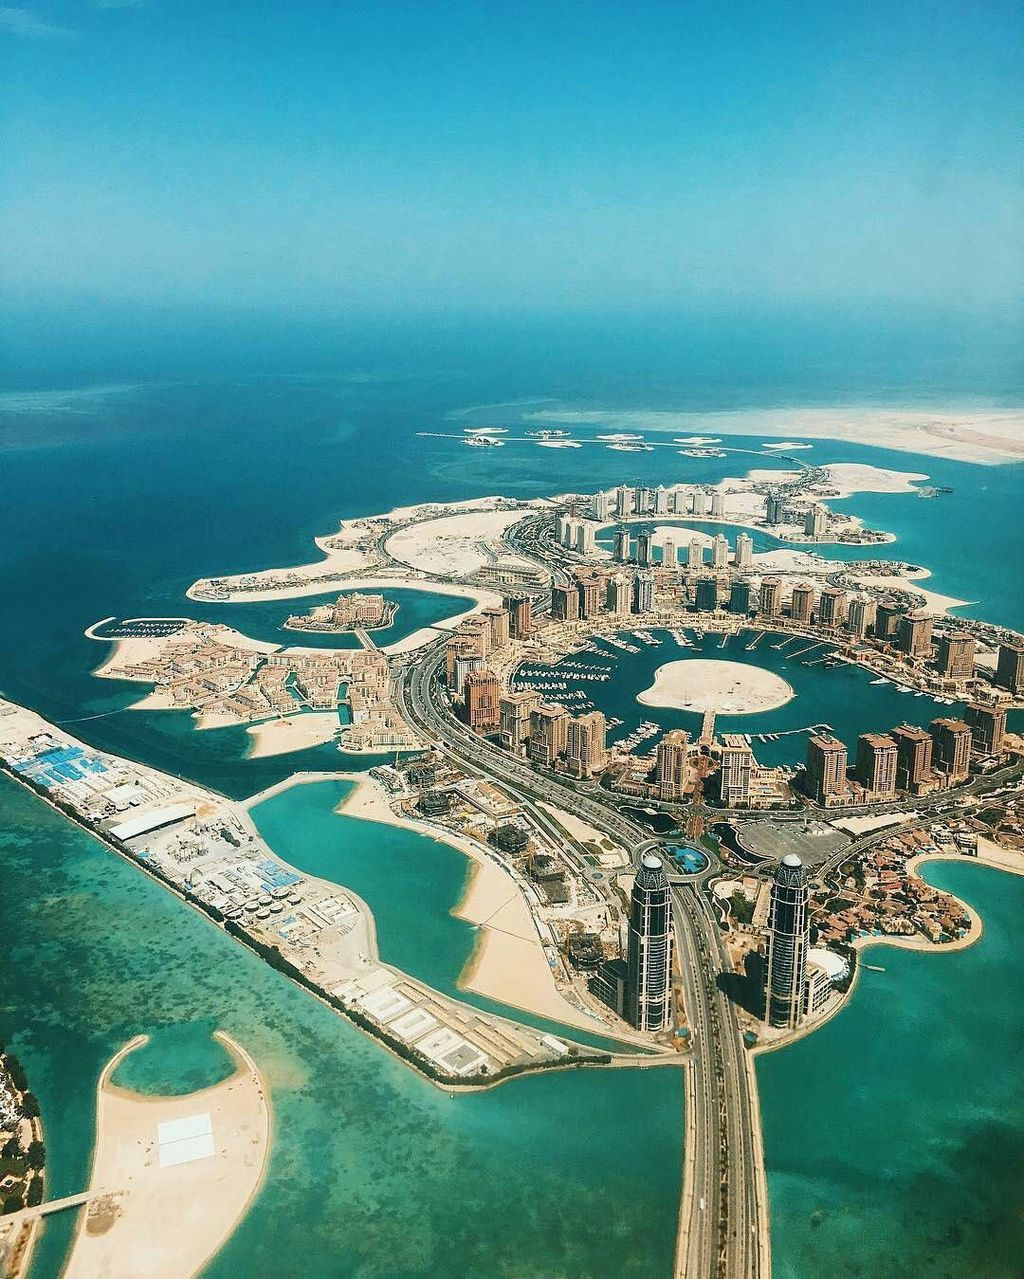 Awesome Photos Of Dubai To Make You Want To Visit It07